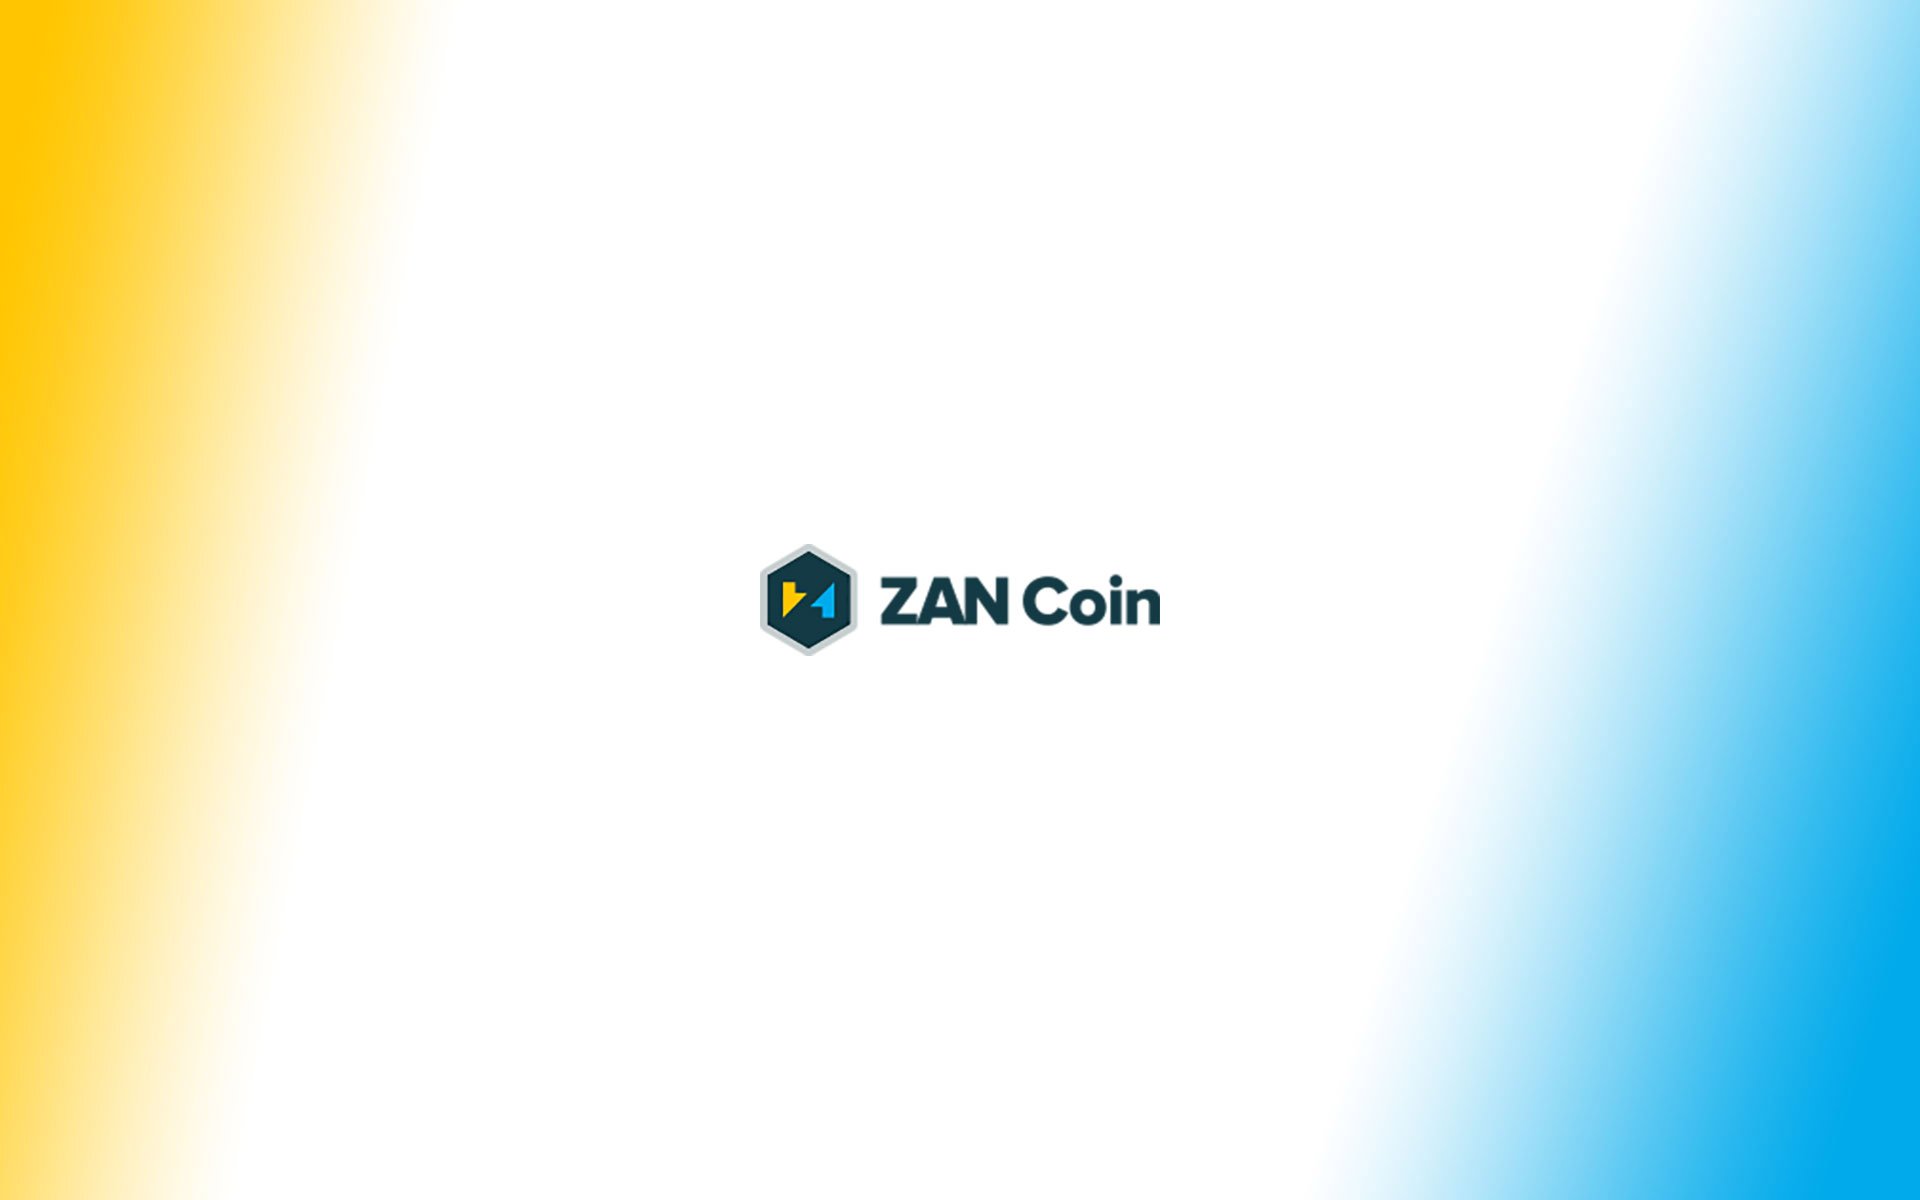 ZAN Coin Announces Launch Of ICO Backed By Groundbreaking Cryptocurrency Payment Processing Solution That Will Streamline Crypto Transactions